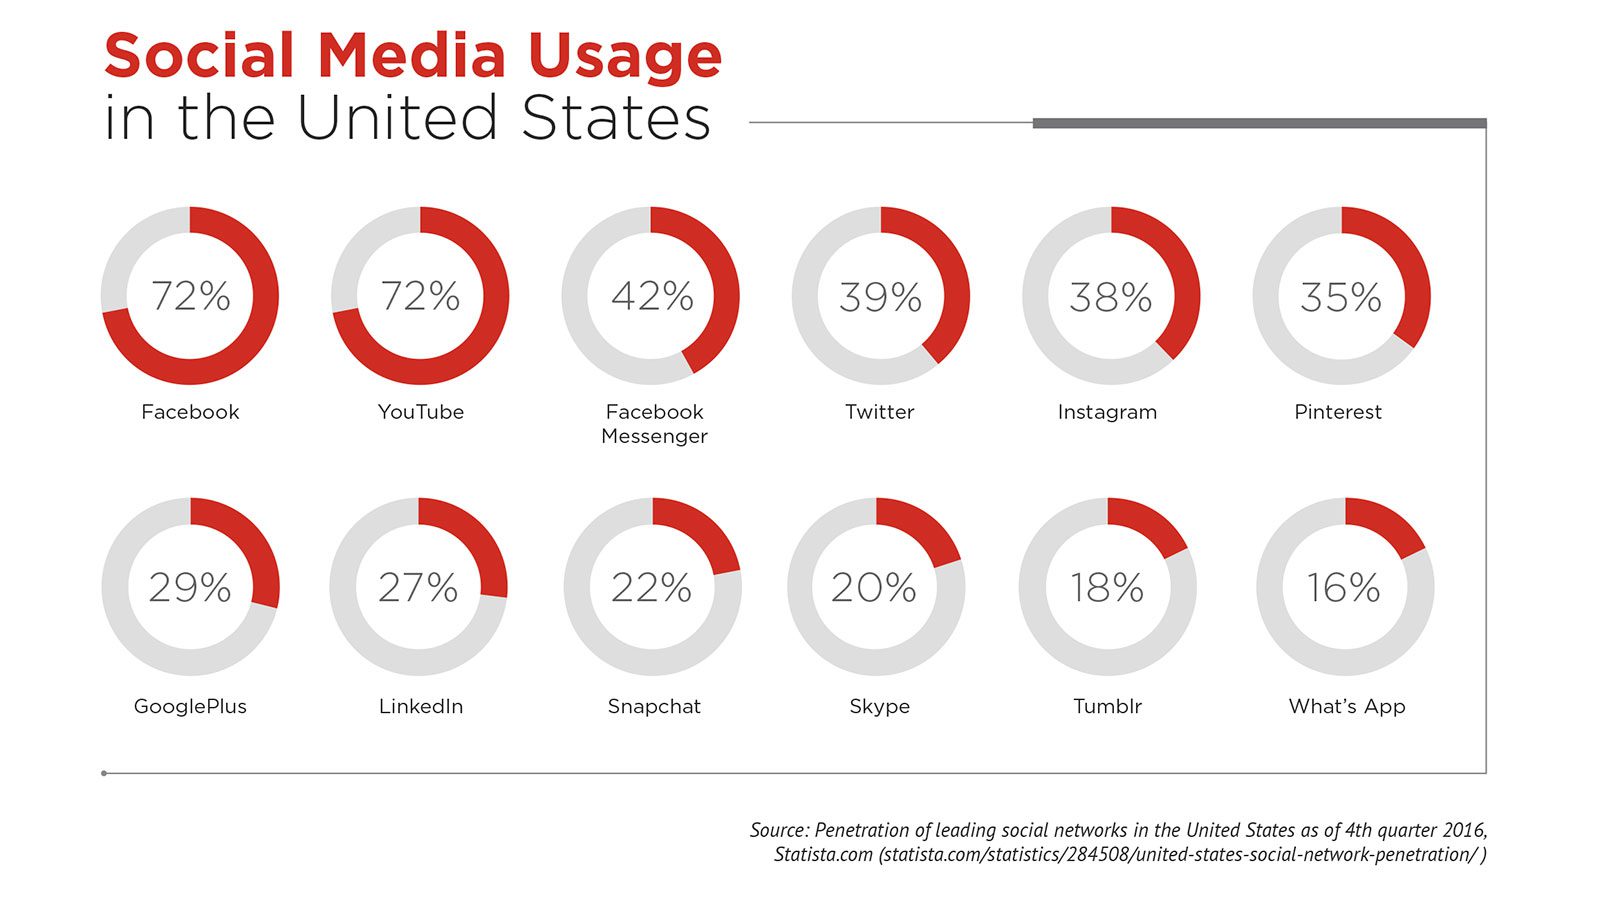 Chart showing social media use by channel